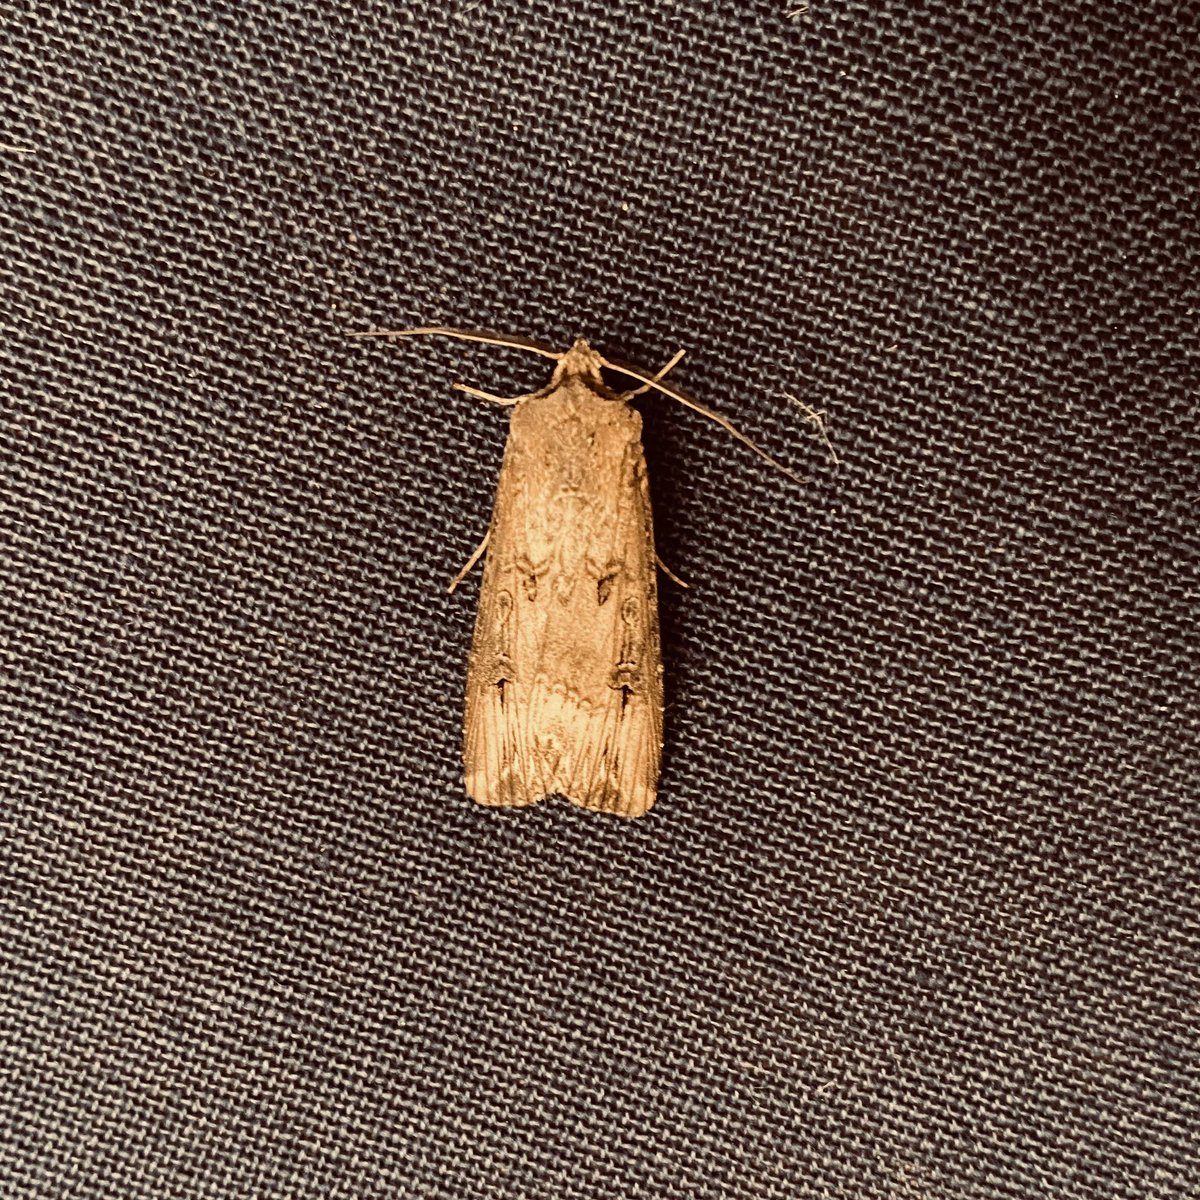 Dark sword-grass found on re-checking egg trays before storing today. Pleasantly surprised after 7 moths of 3 (Orthosia) species to MV light last night. Other sightings further S and W last night so this may have arrived on the sou'wester from continental Europe. @MothsSomerset